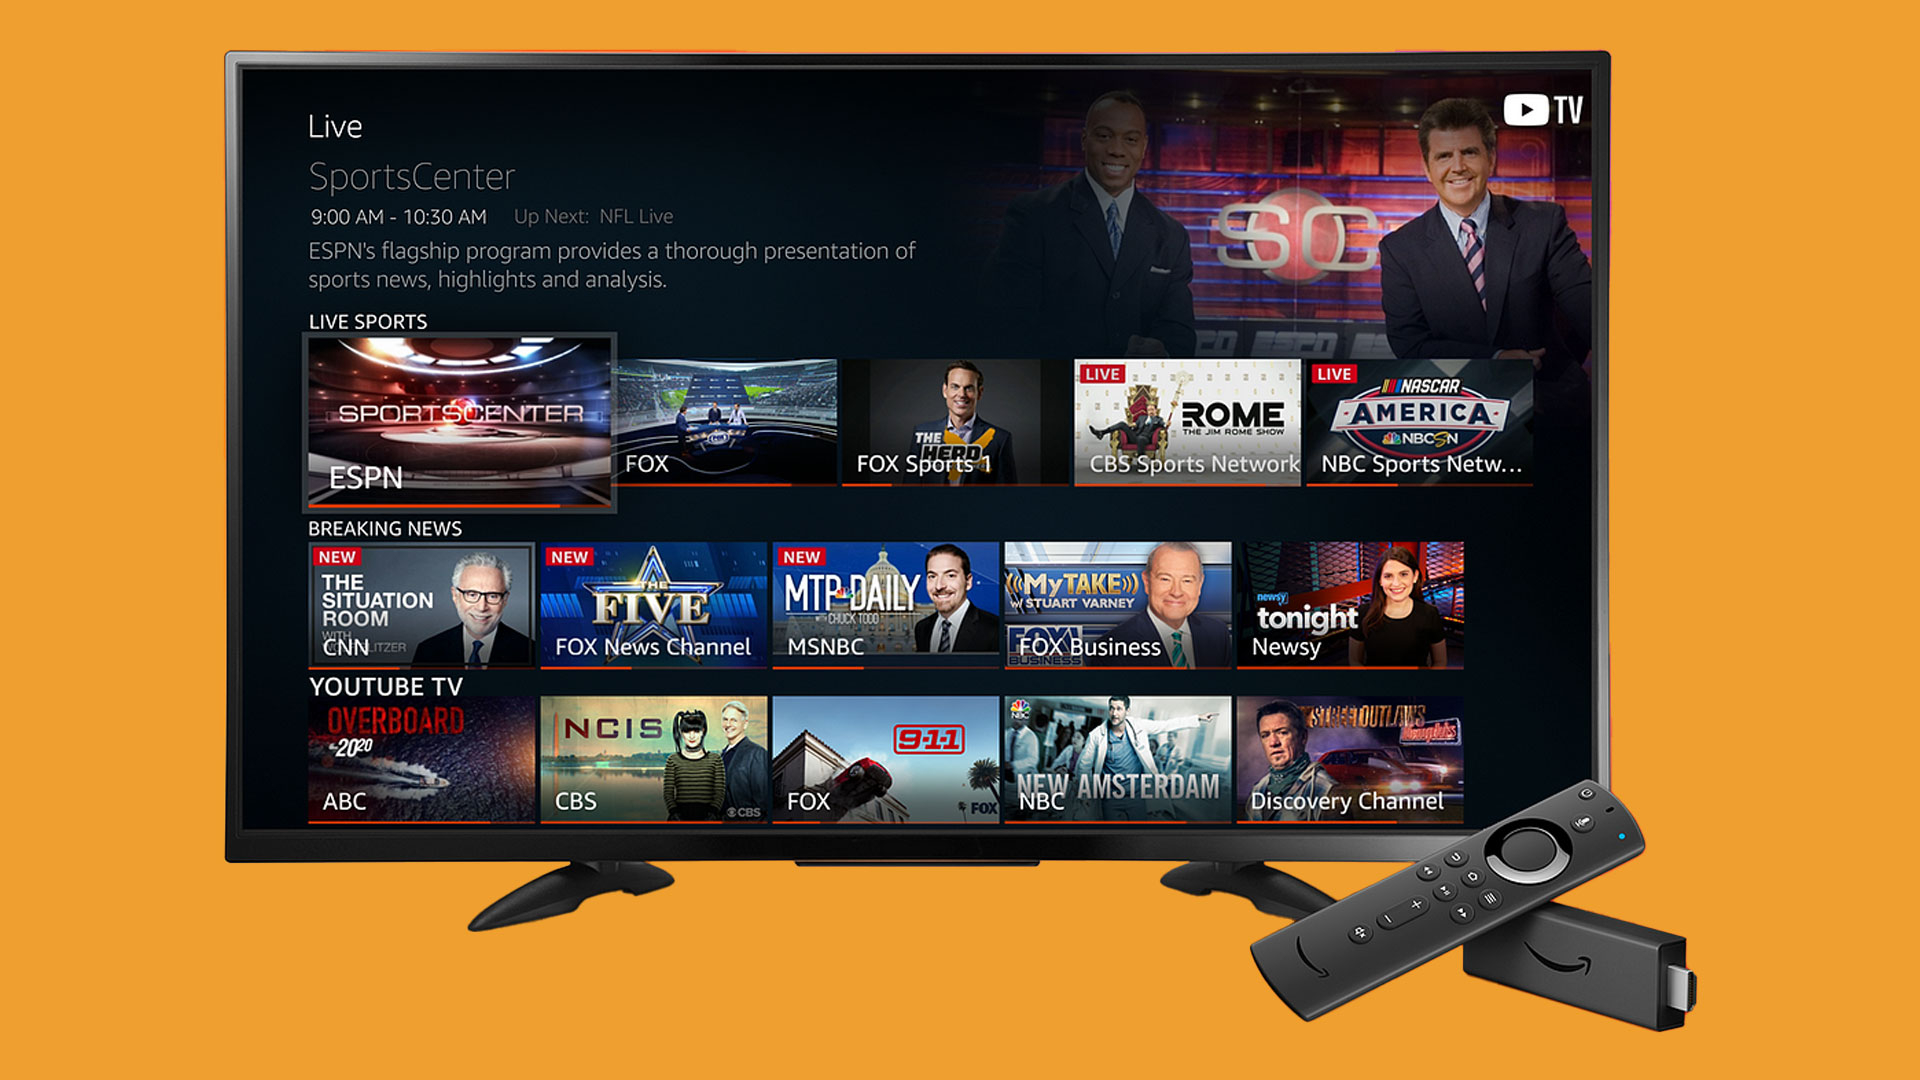 Fire TV adds a Free tab featuring apps, movies, TV and news